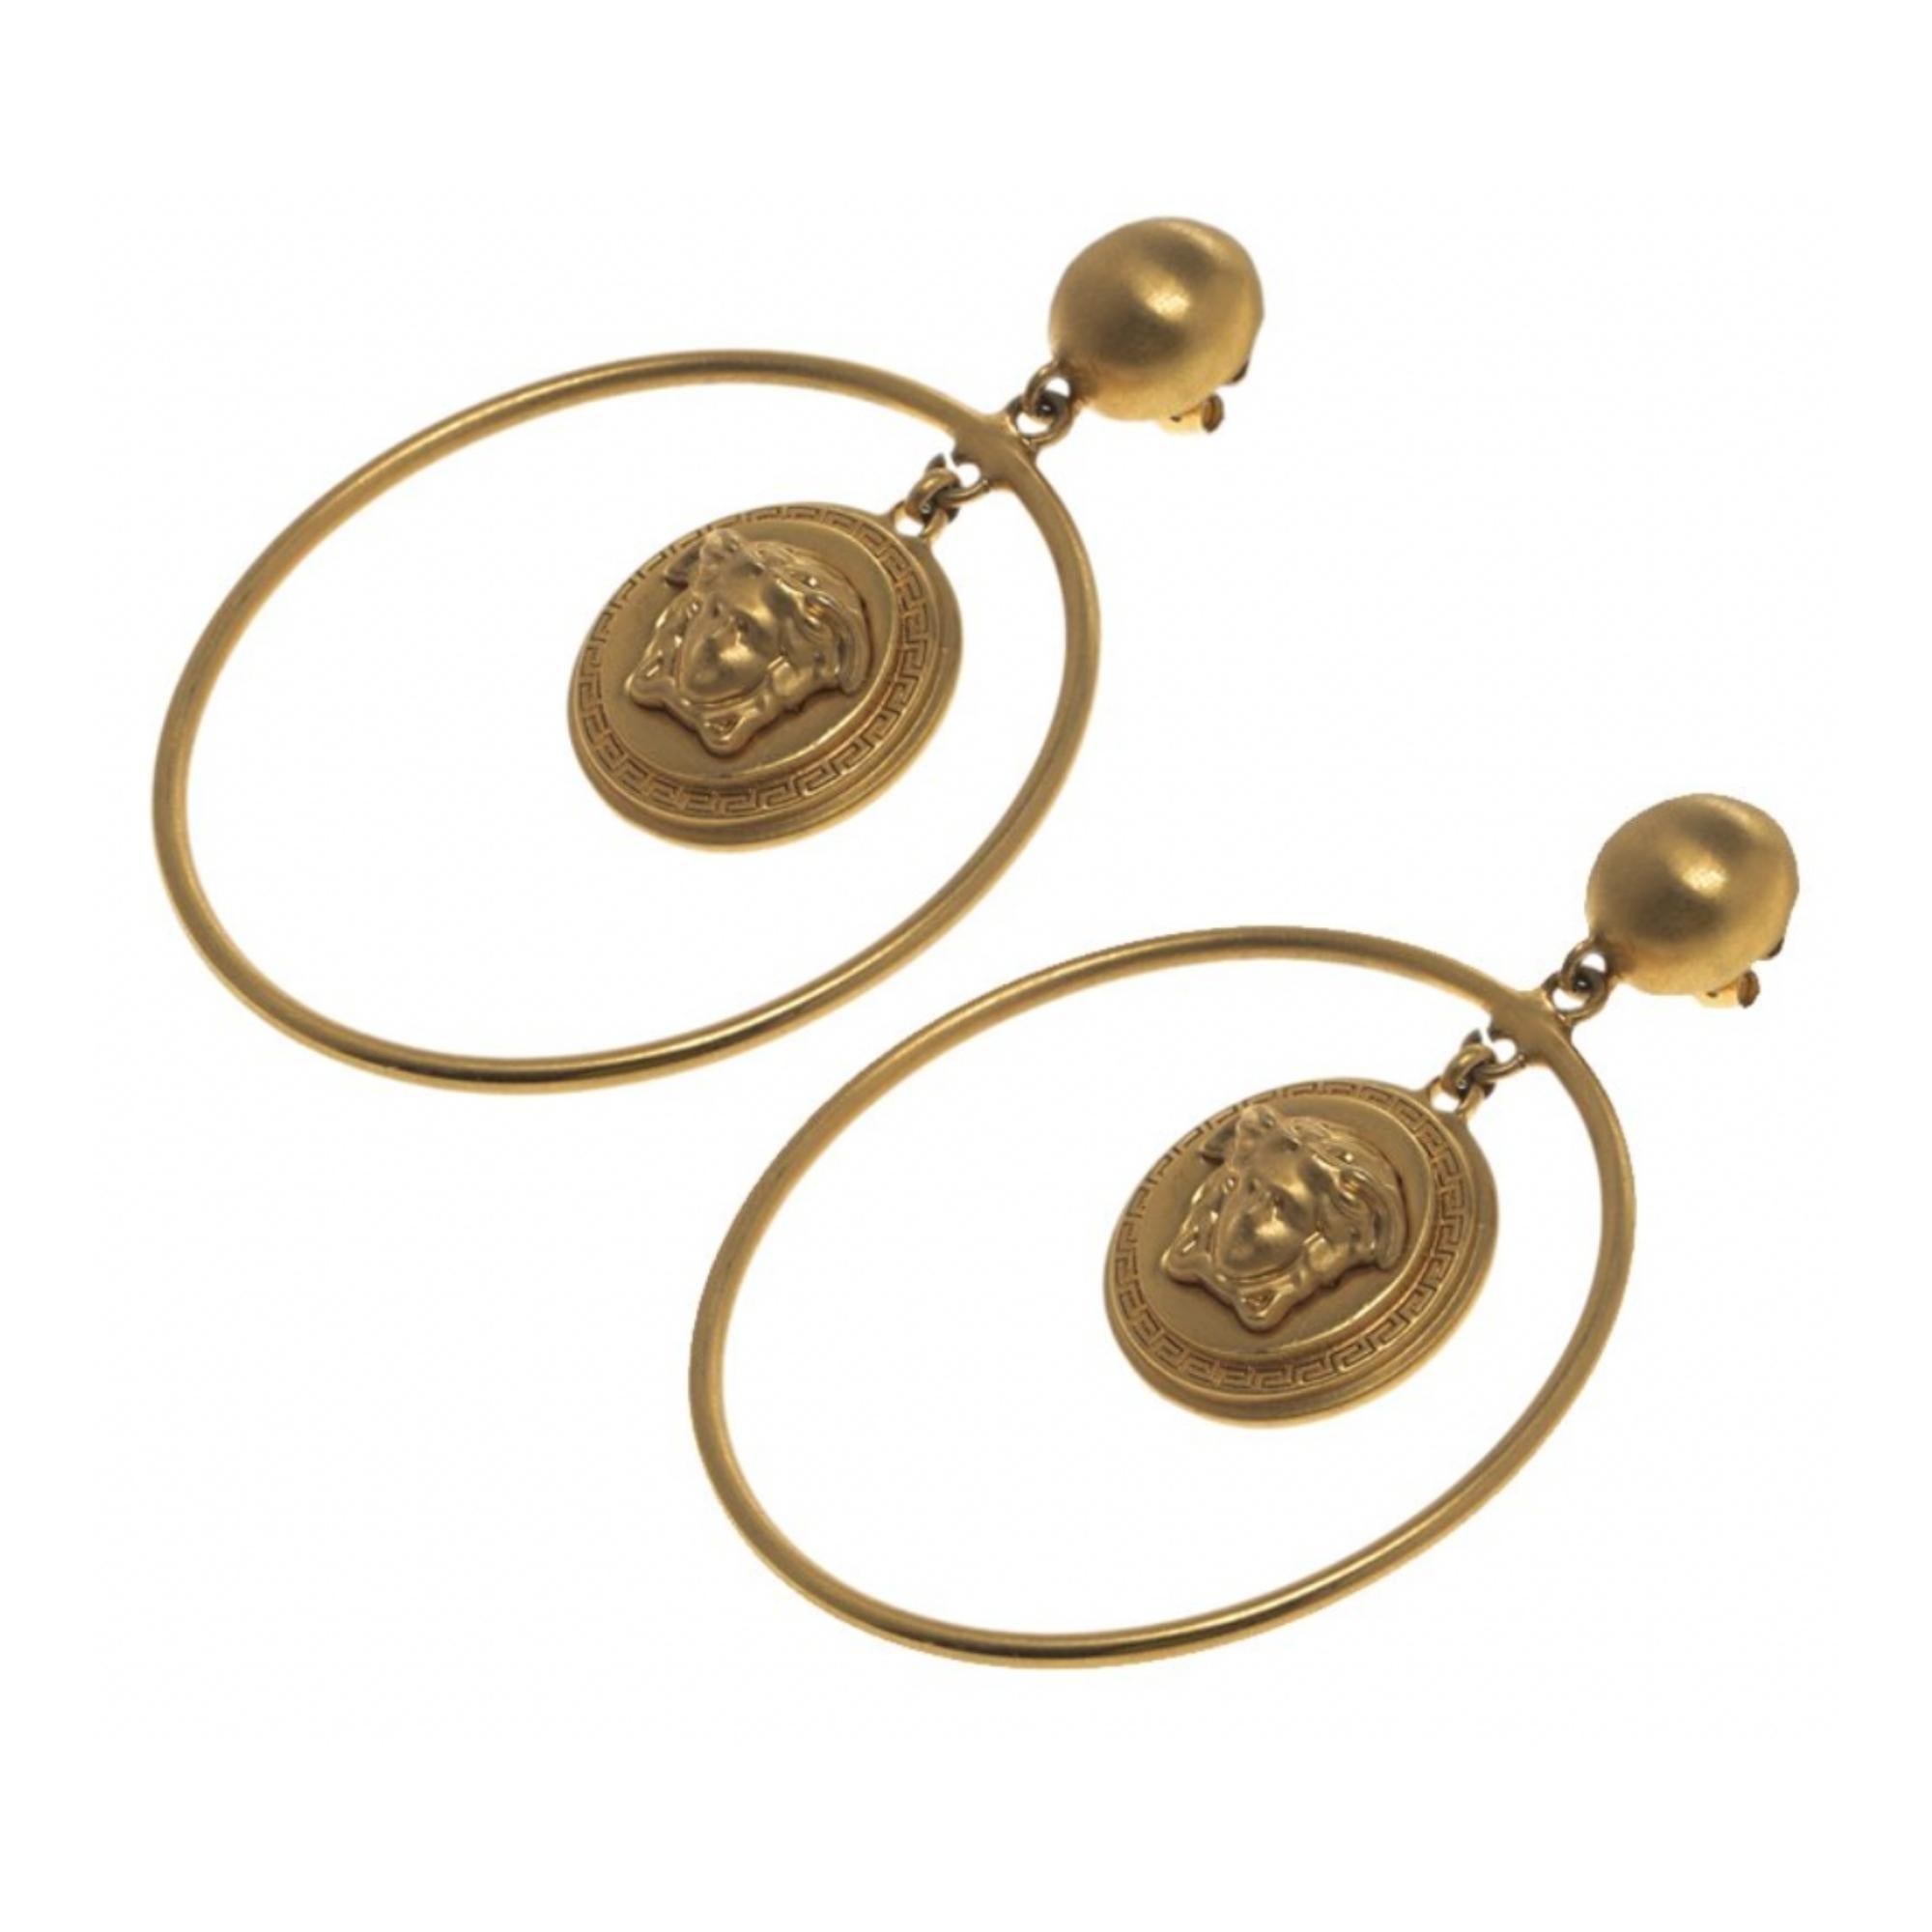 These Versace earrings are feminine and modish. Constructed from gold-tone metal, the pair carries the famous Medusa emblems dangling within hoops.

Color: Gold tone
Material: Metal
Marks: VERSACE Made in Italy
Clasp Style: For pierced ears
Year: